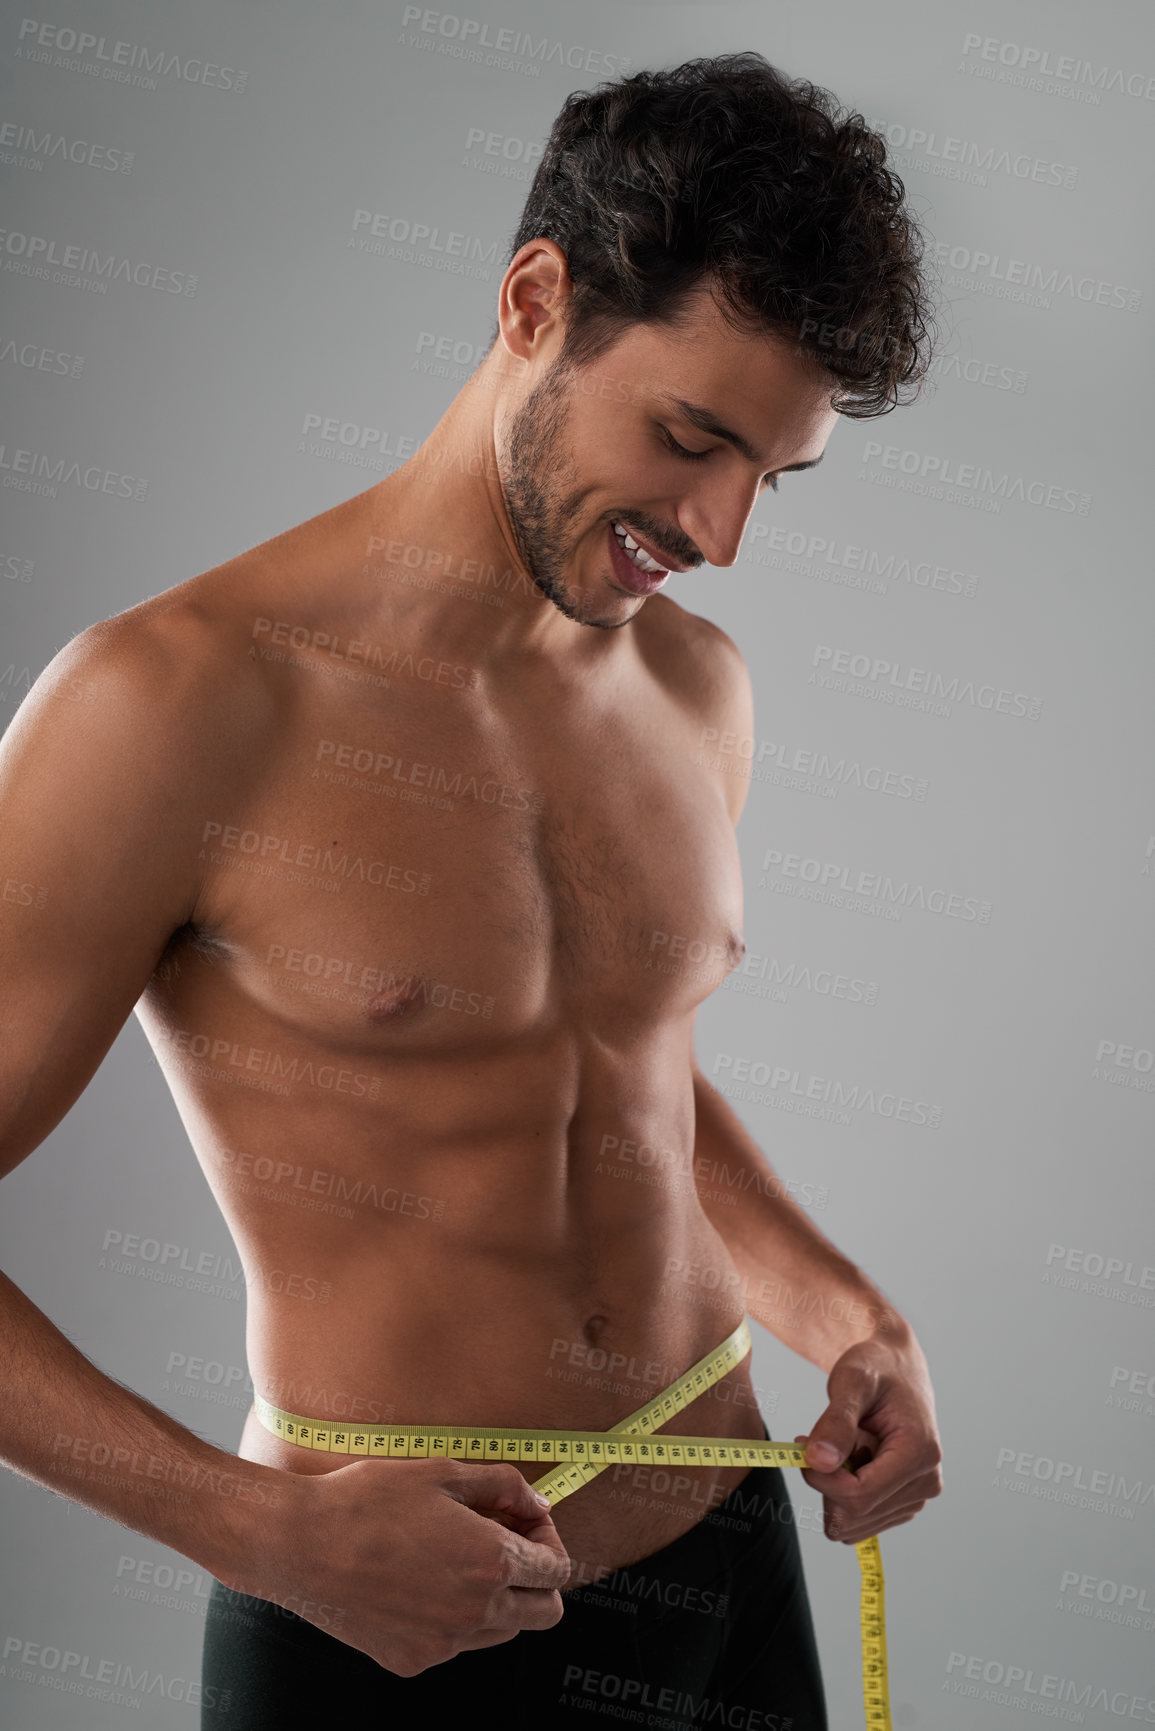 Buy stock photo Studio shot of a handsome young shirtless man measuring his midsection against a grey background